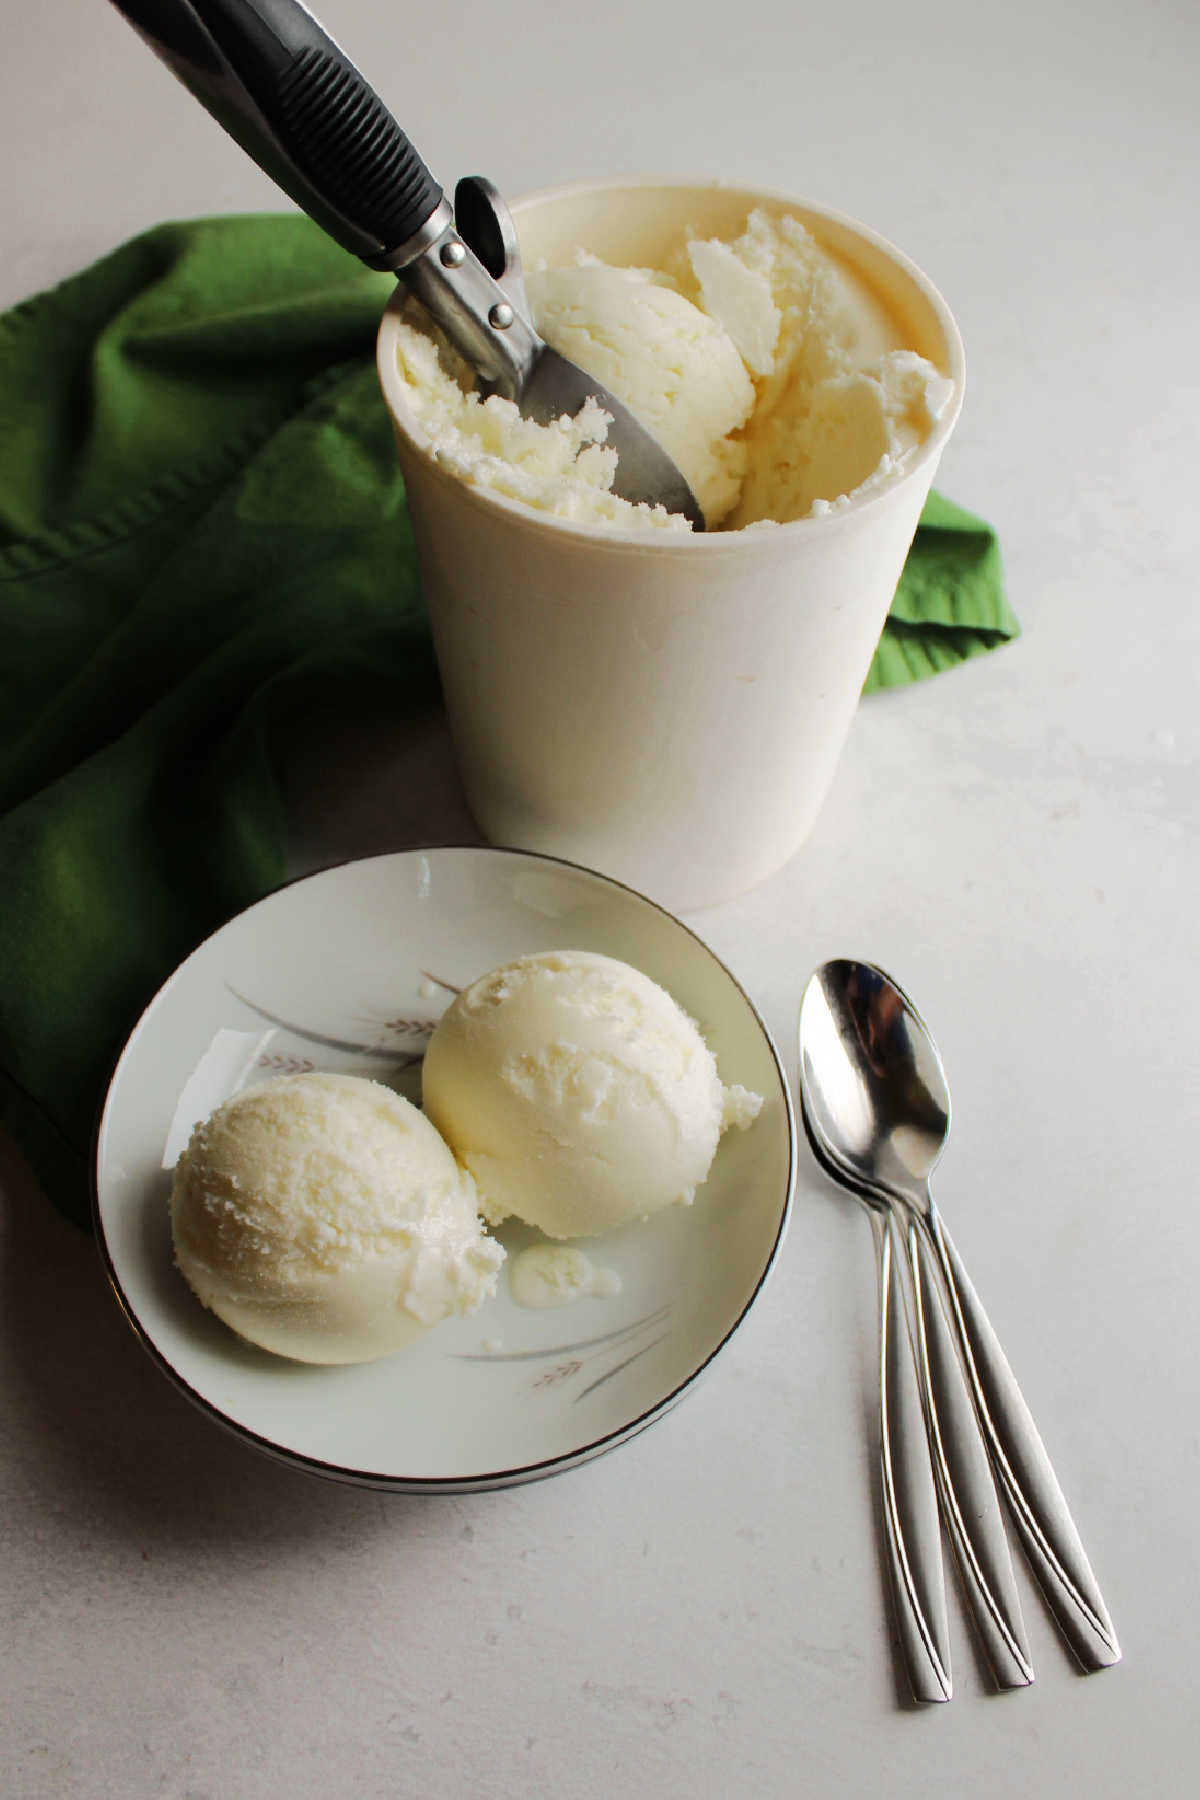 Spoons by bowl of key lime sherbet with storage container and ice cream scoop in background. 